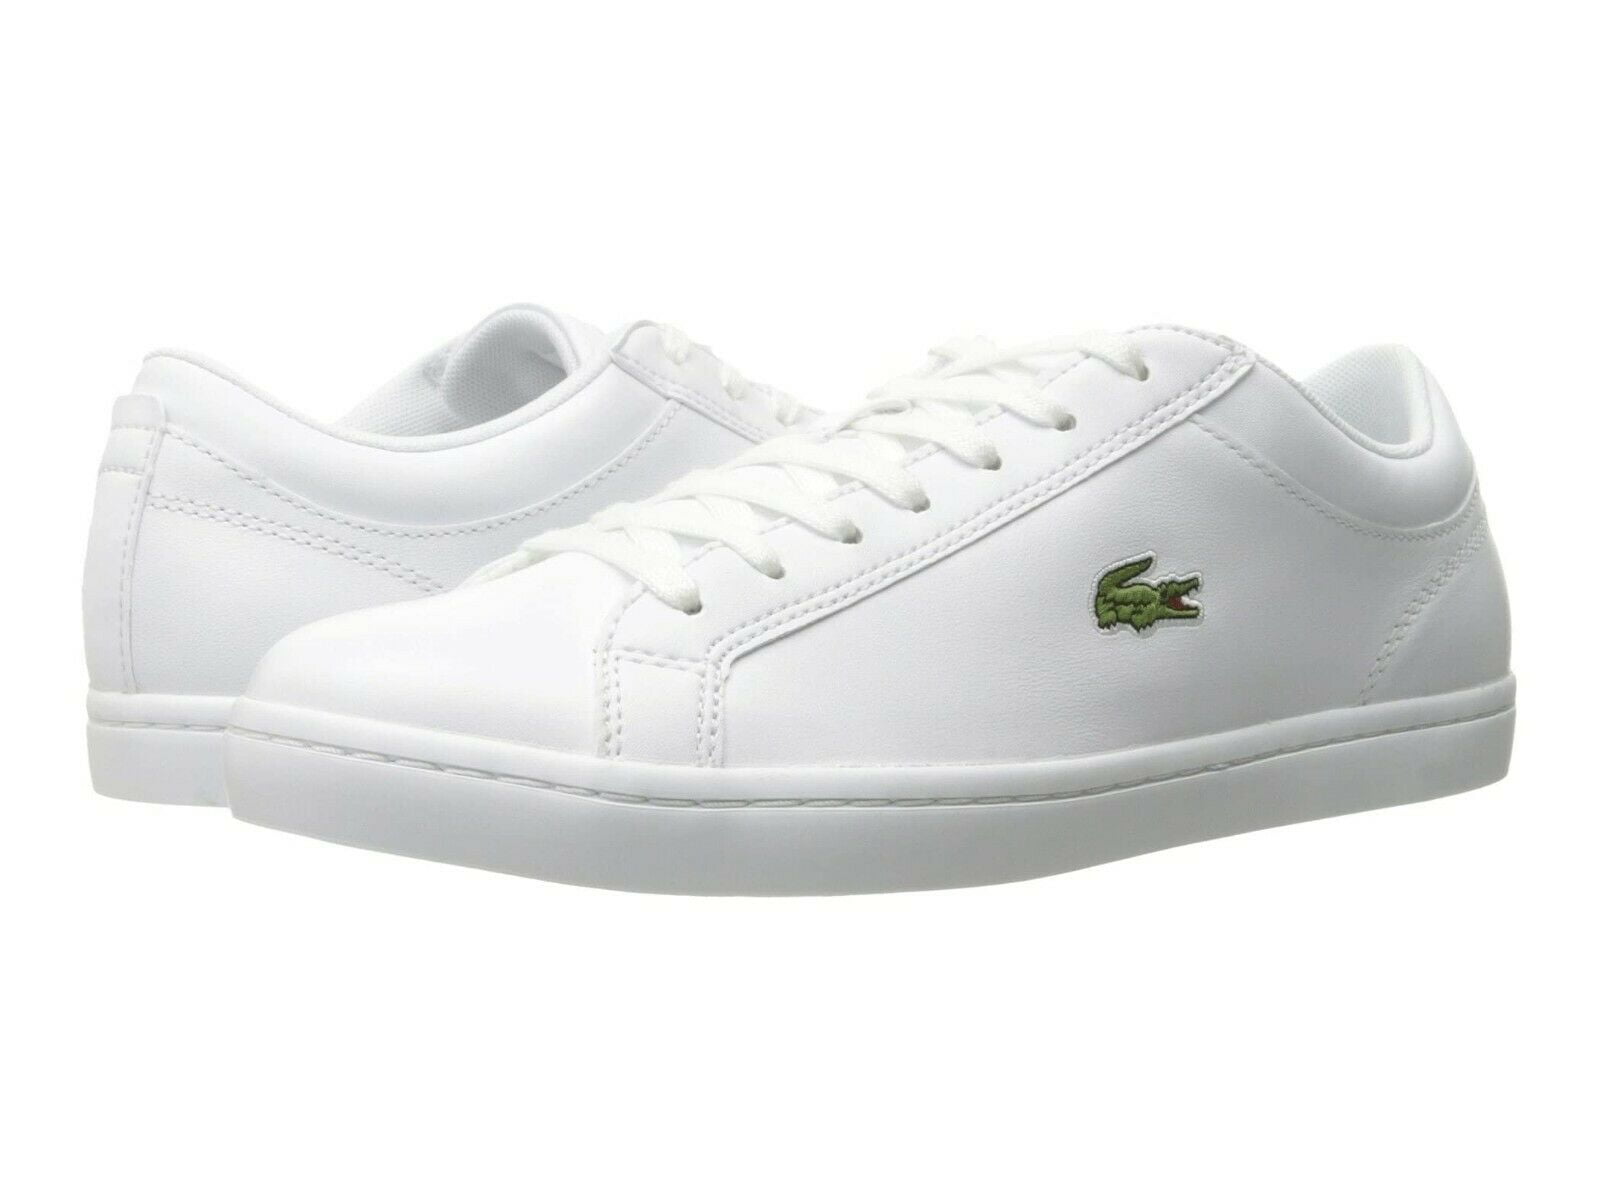 Details about   Lacoste Men's Carnaby Evo 220 1 SMA Sneaker Choose SZ/color 